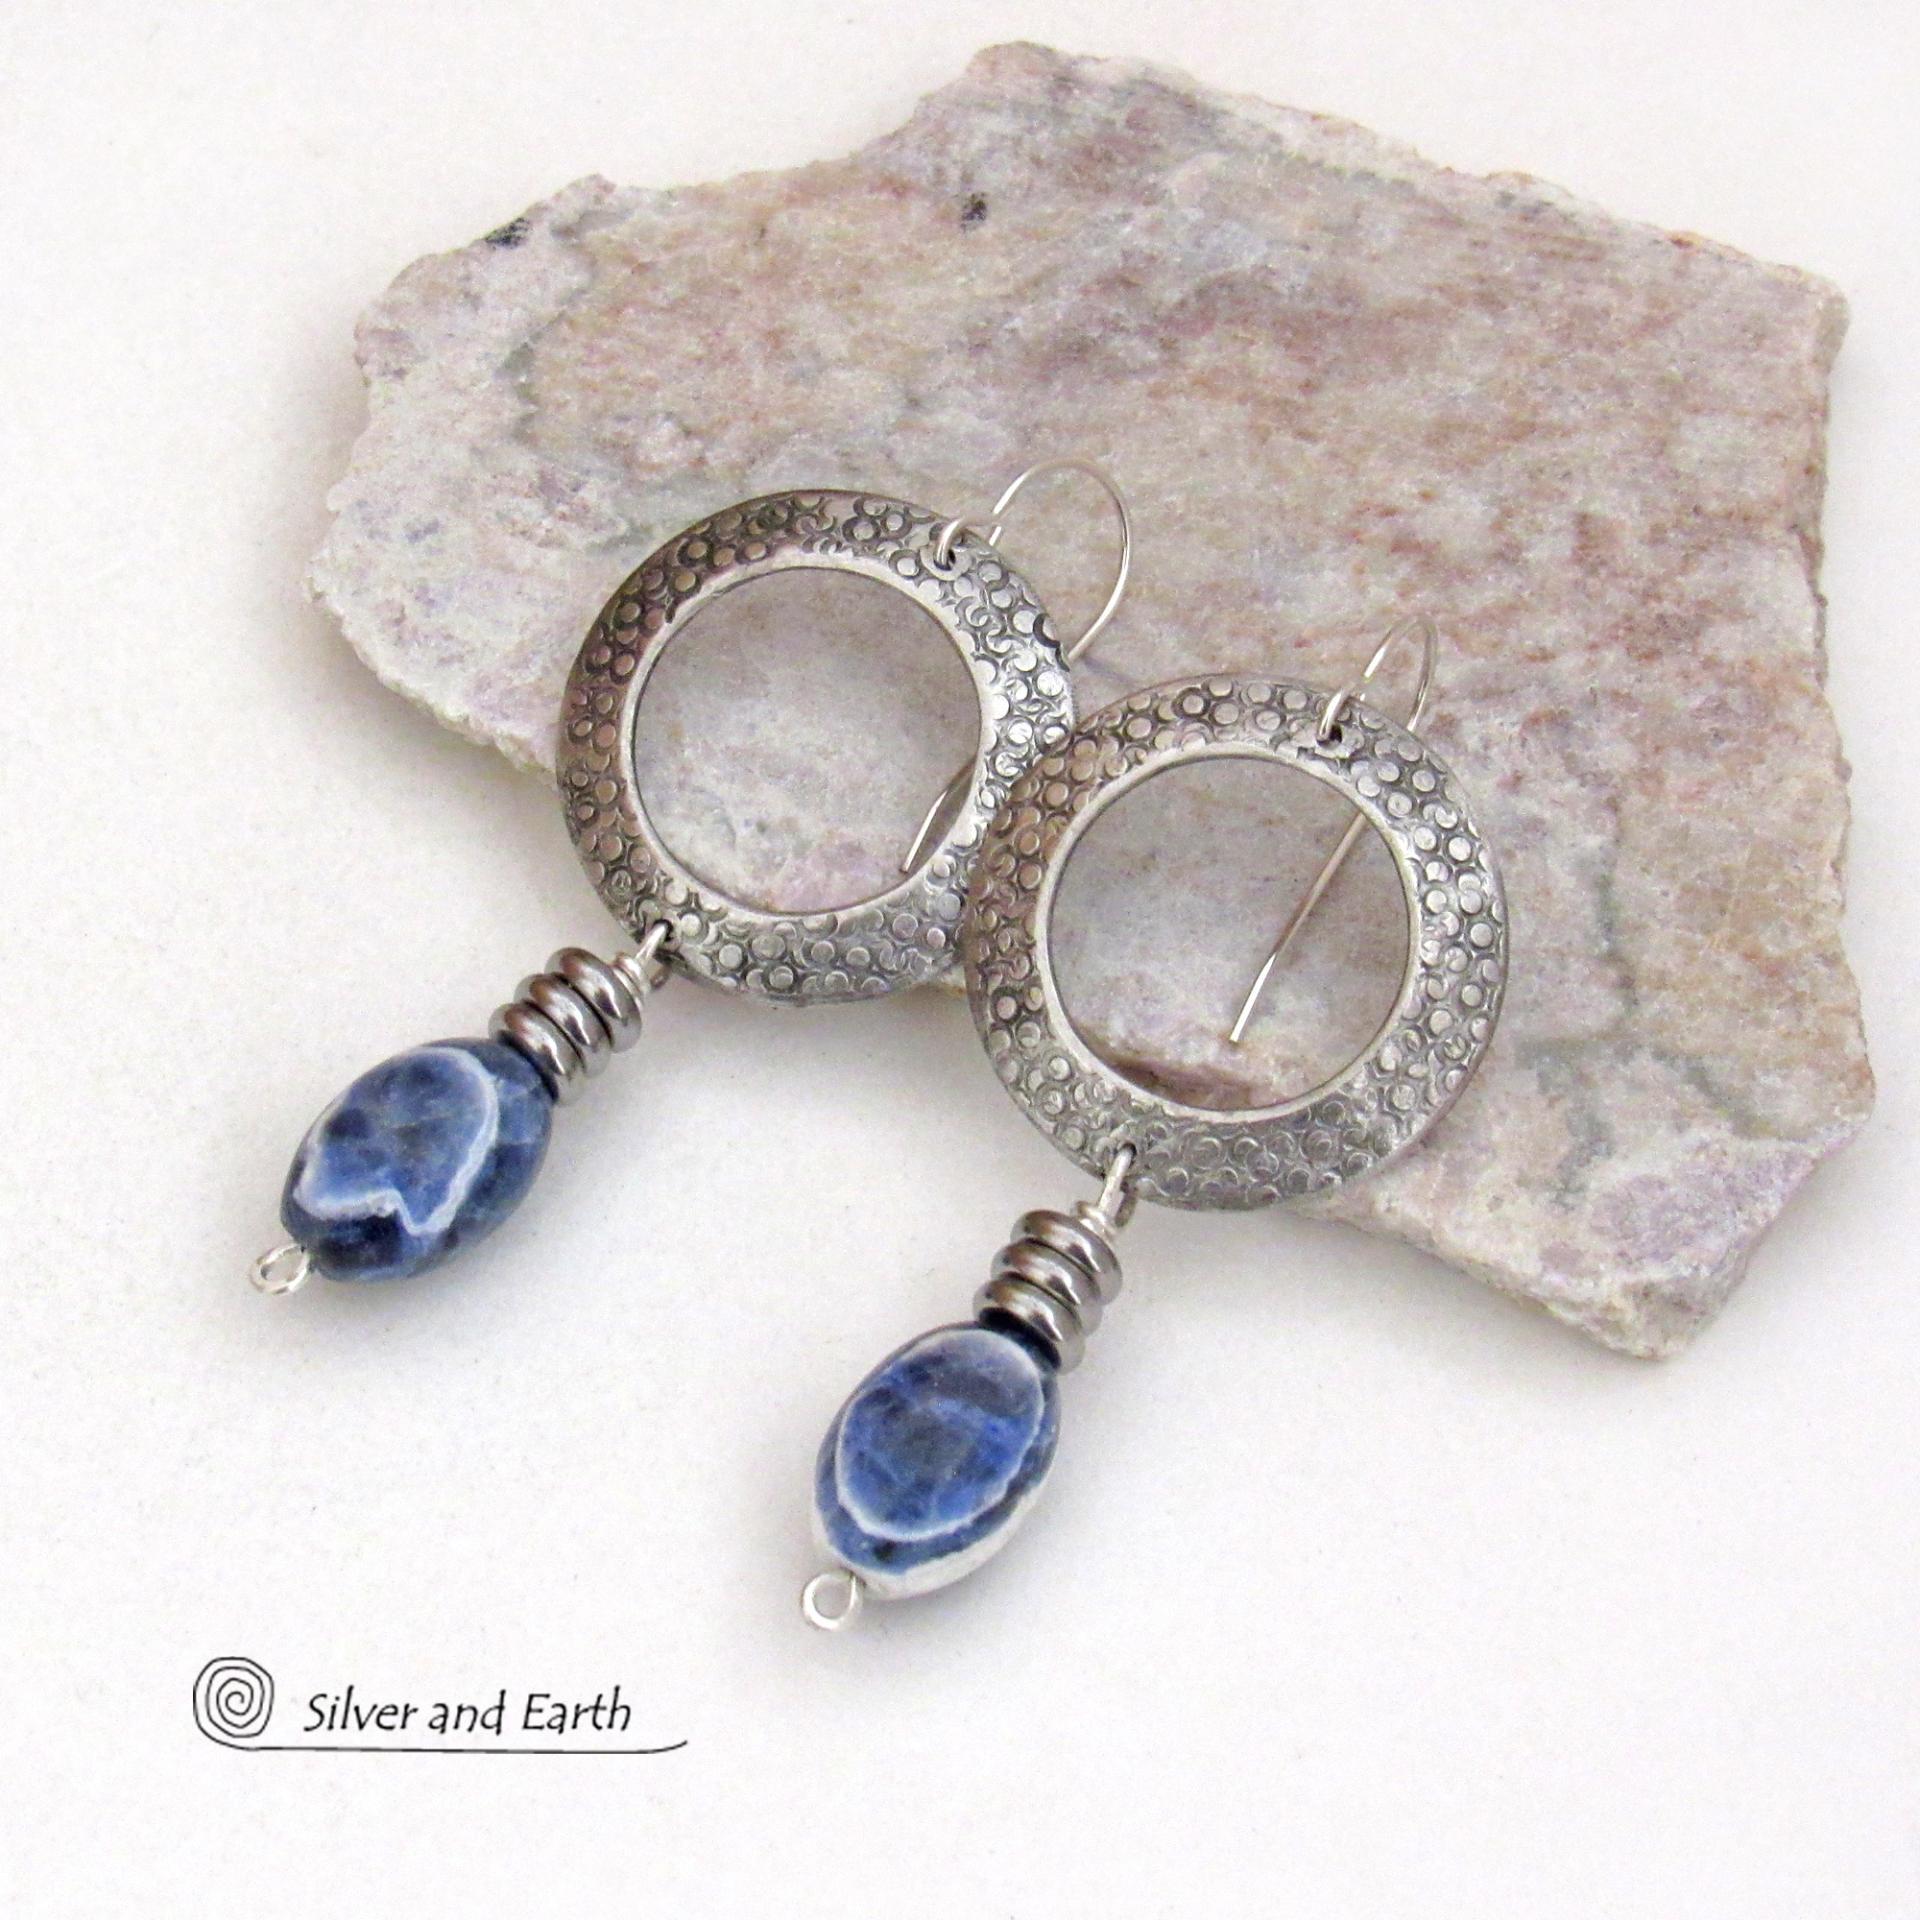 Silver Pewter Circle Hoop Earrings with Blue Sodalite Dangles - Artisan Handcrafted Modern Natural Gemstone Jewelry